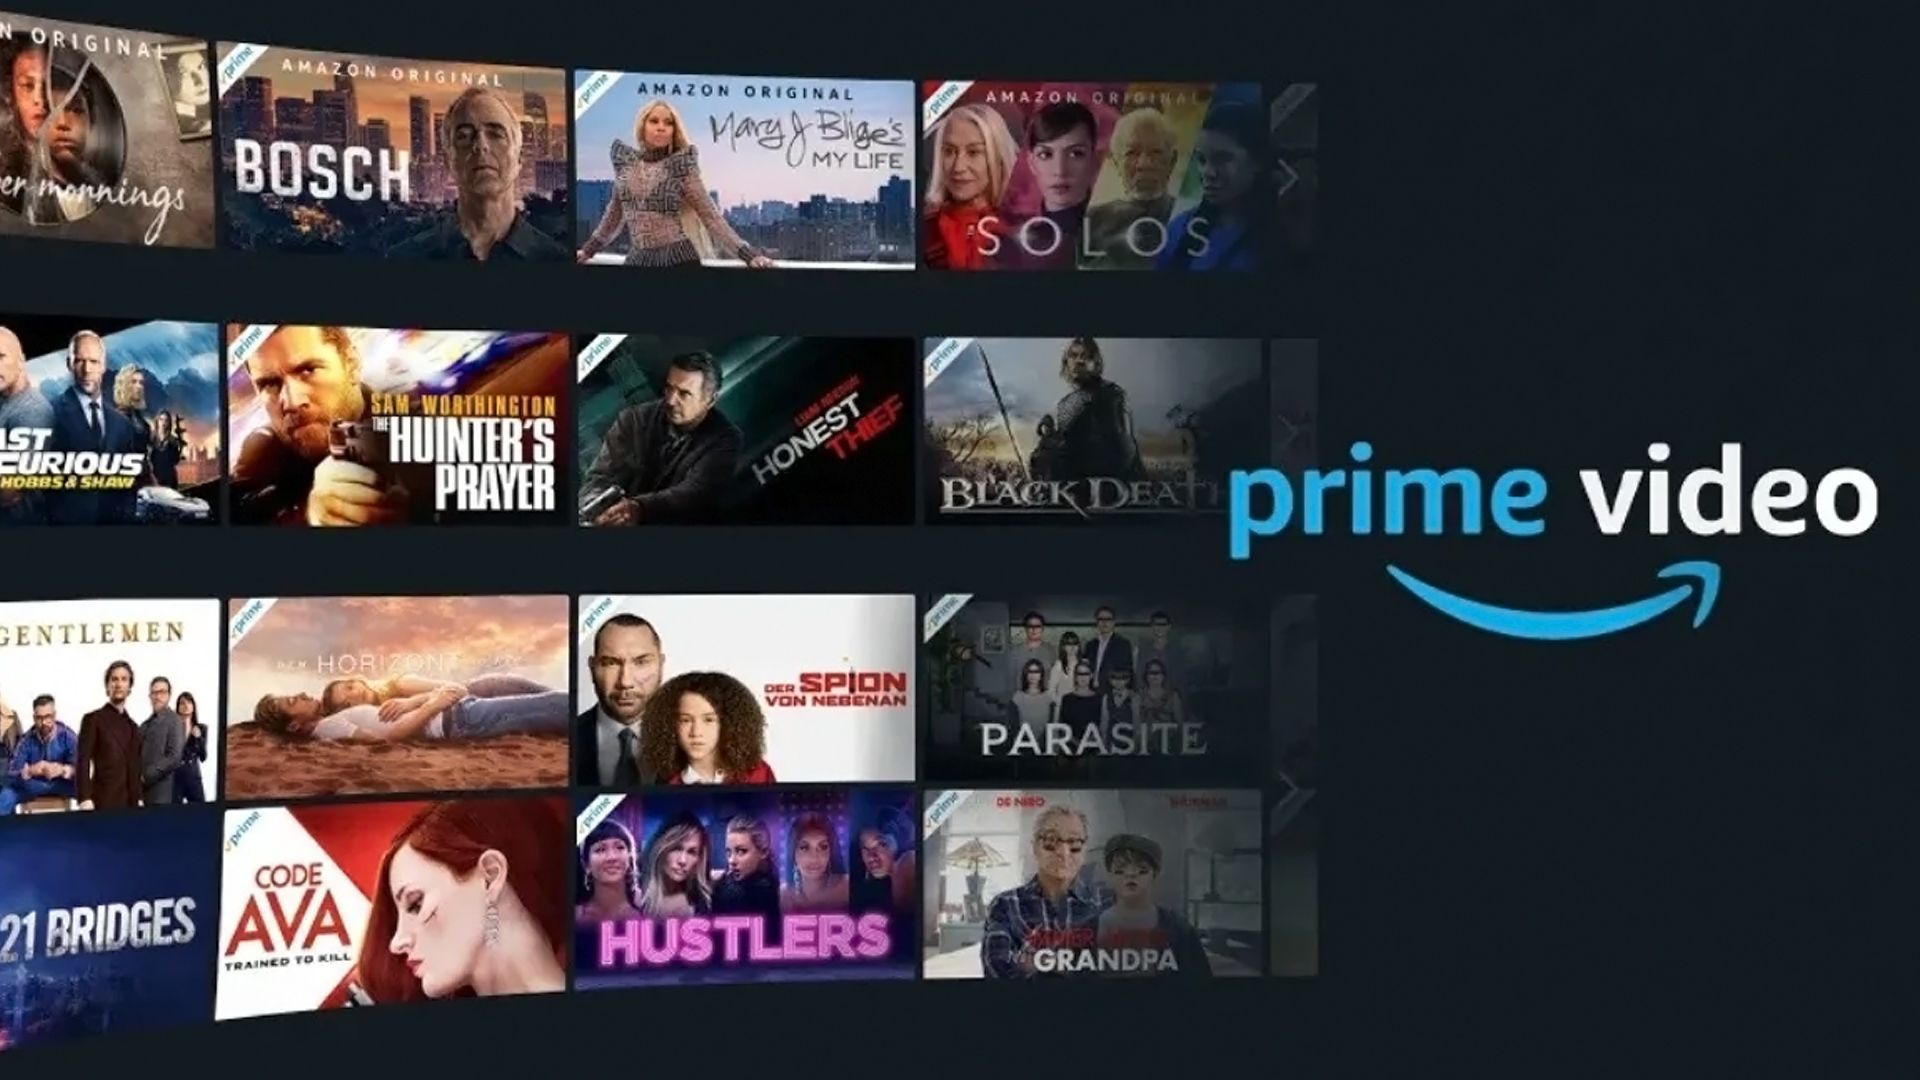 Amazon’s latest ad rollout may set a new streaming standard